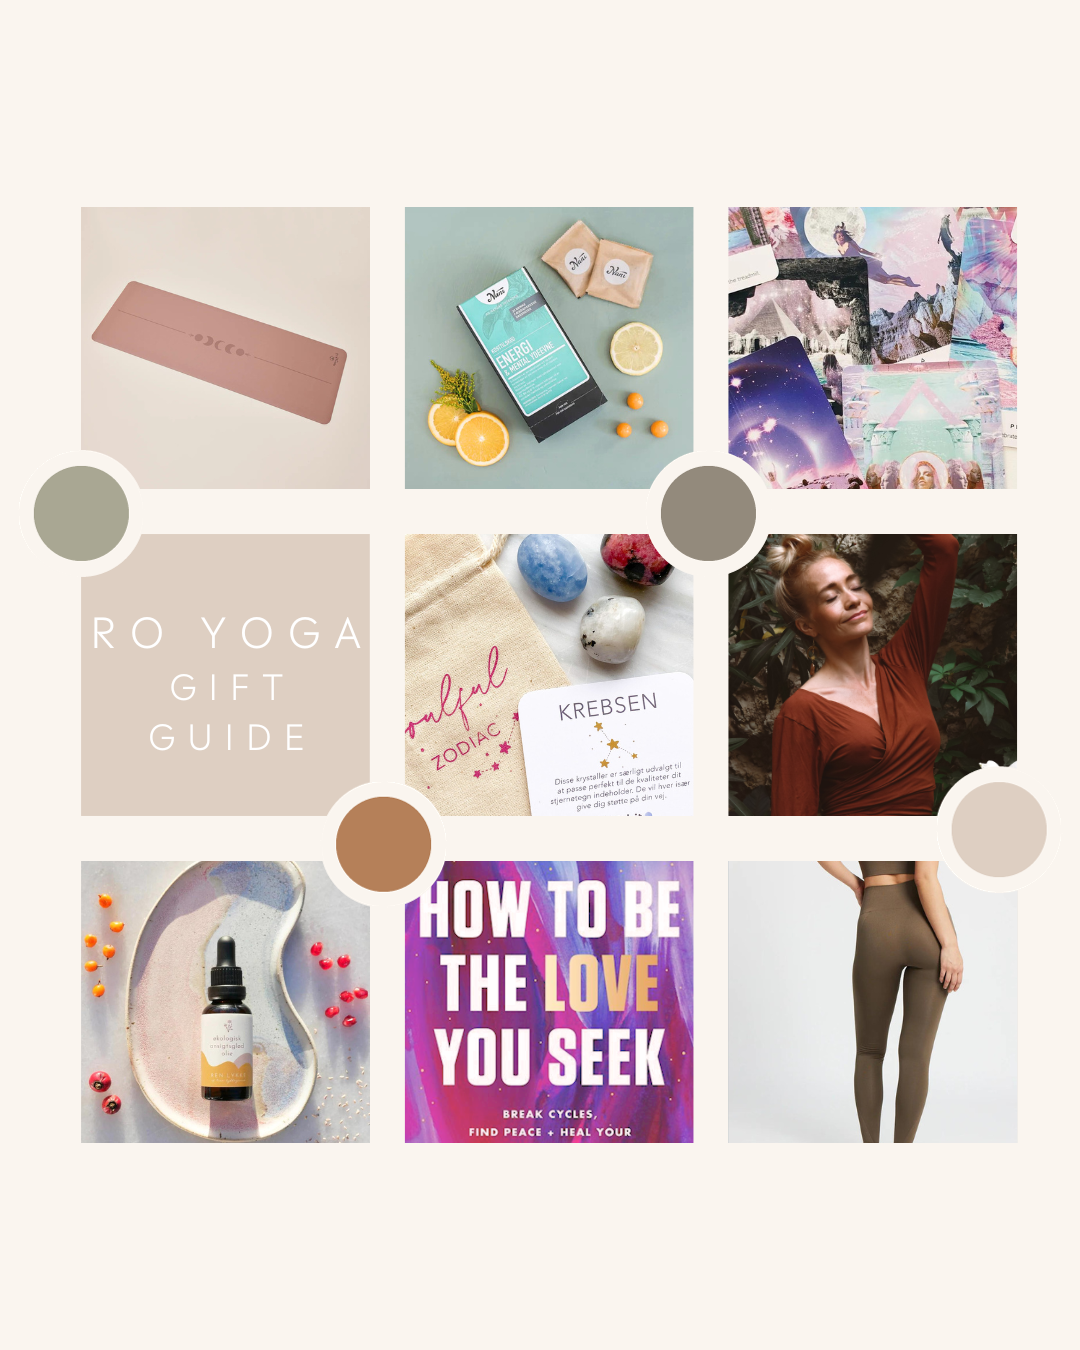 Mood Board Photo Collage Instagram Post (1080 x 1350 px) (1).png